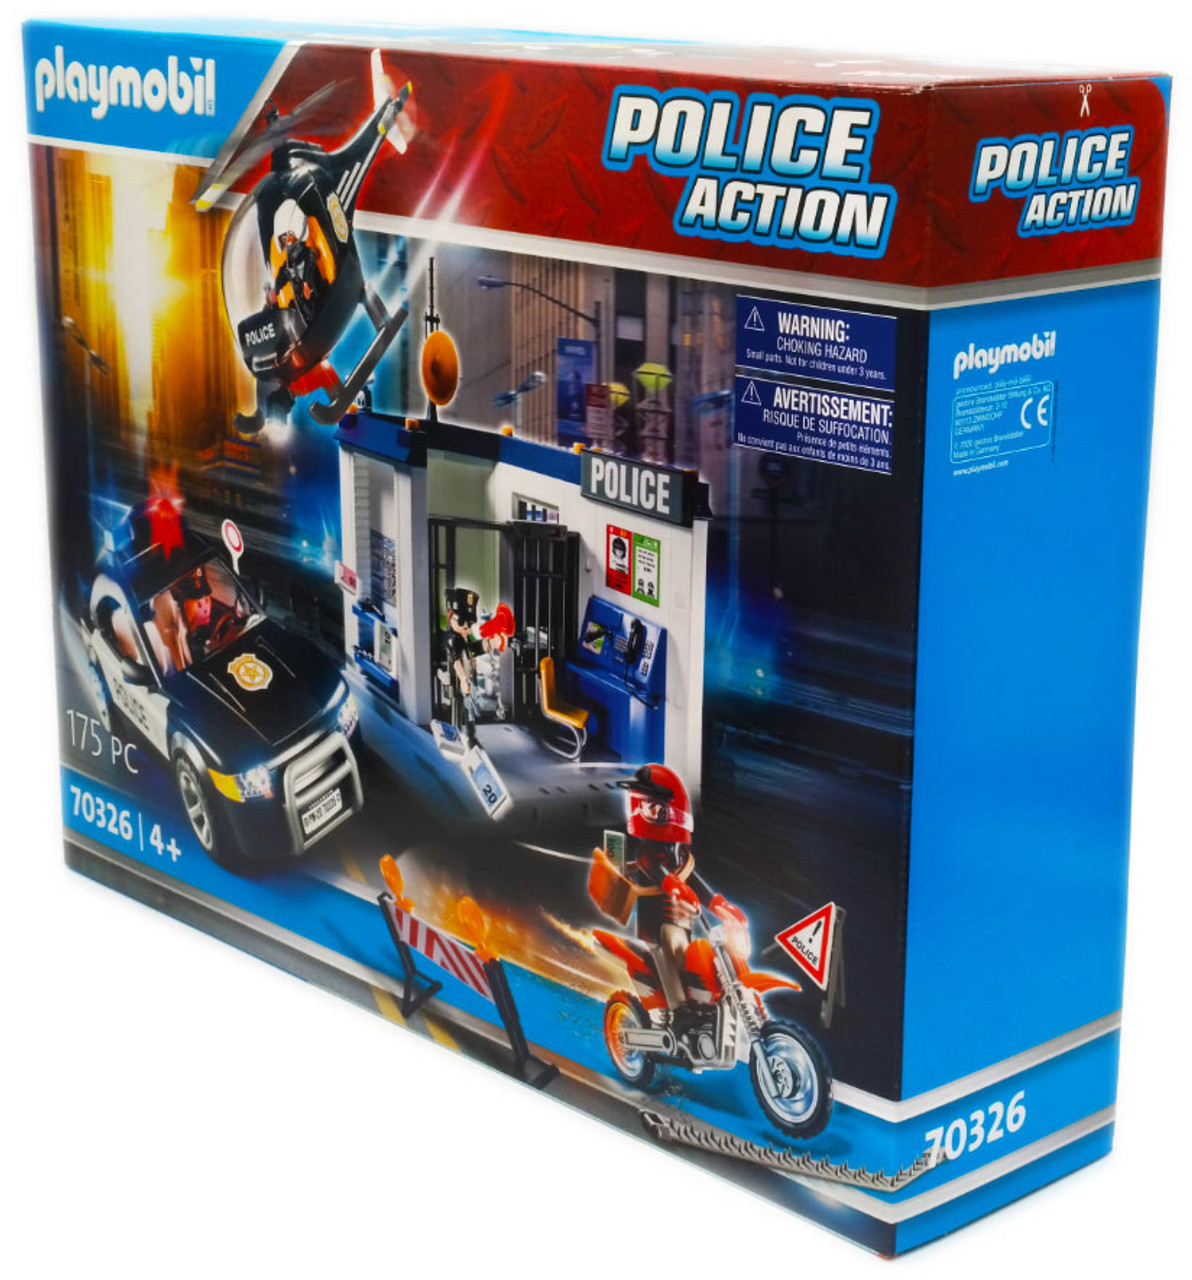 Playmobil City Action! Build and Play Police Headquarters Prison, Police  Car, Helicopter and More!! 